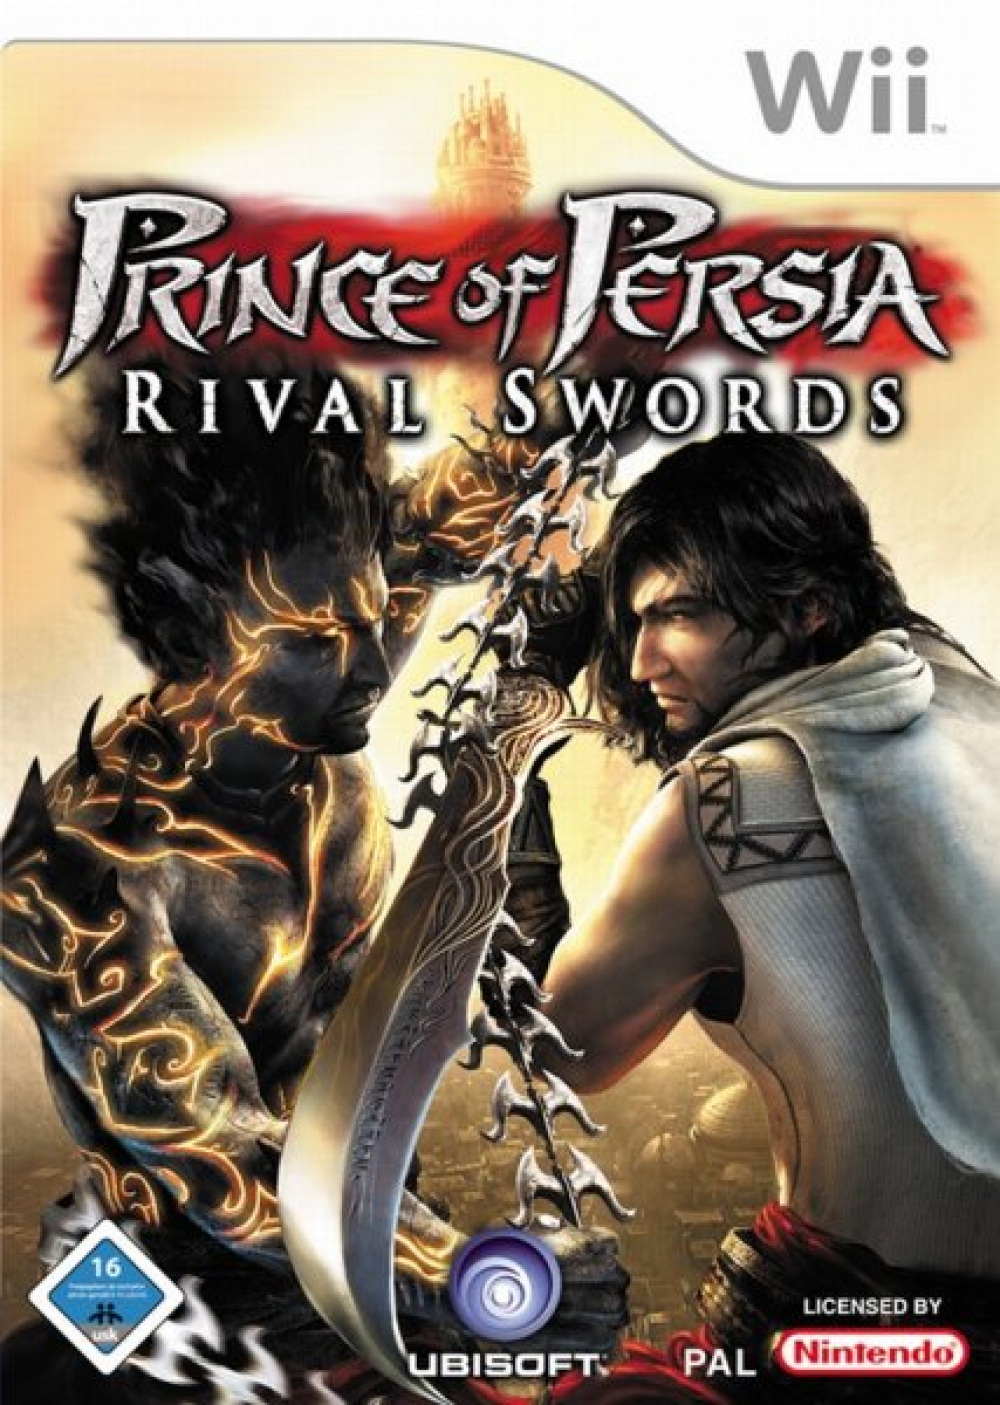 Prince of Persia: Rival Swords  Video Game Reviews and Previews